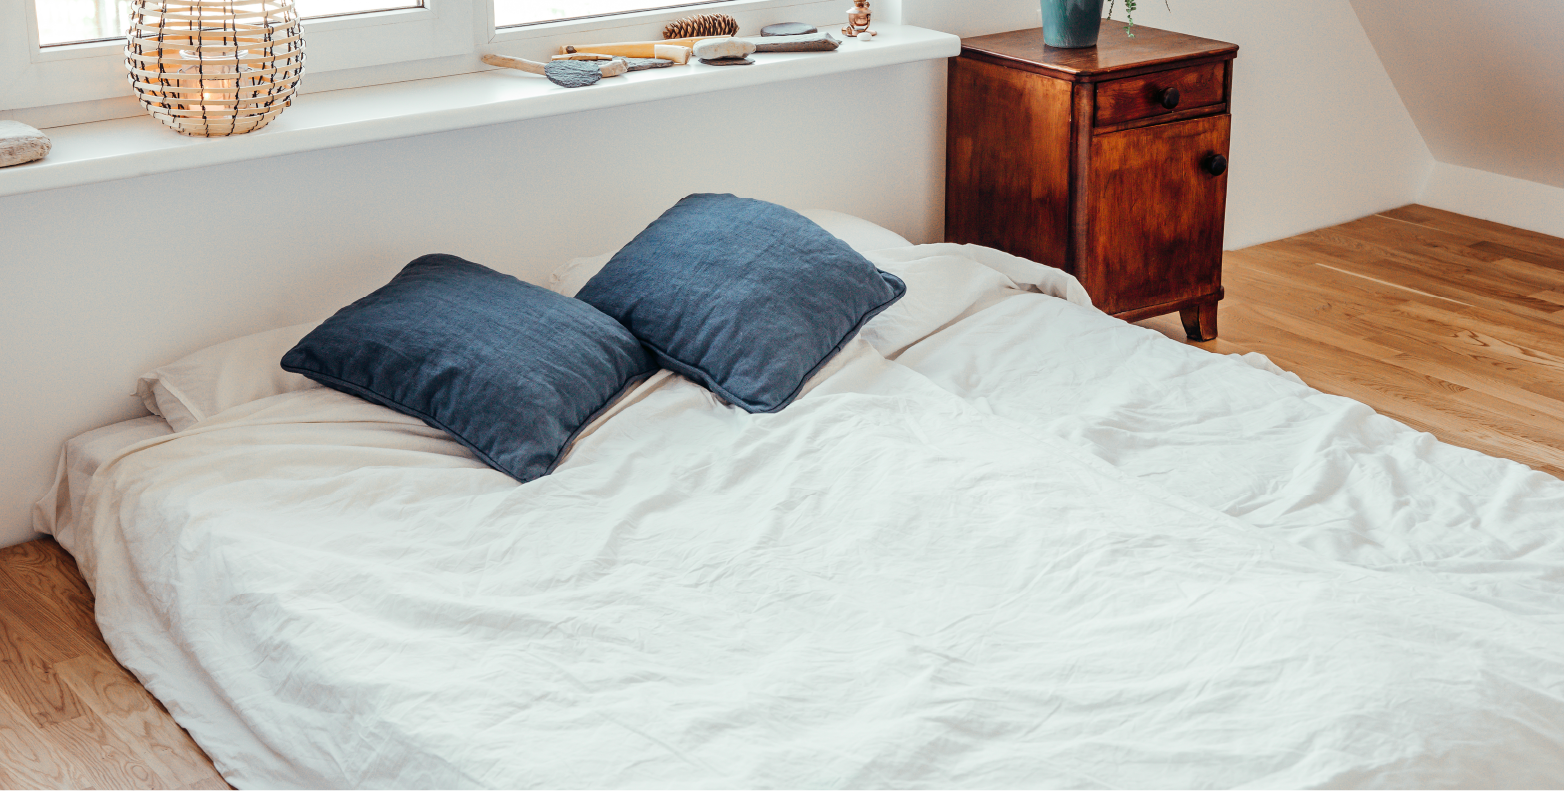 White mattress on the floor with two blue pillows.